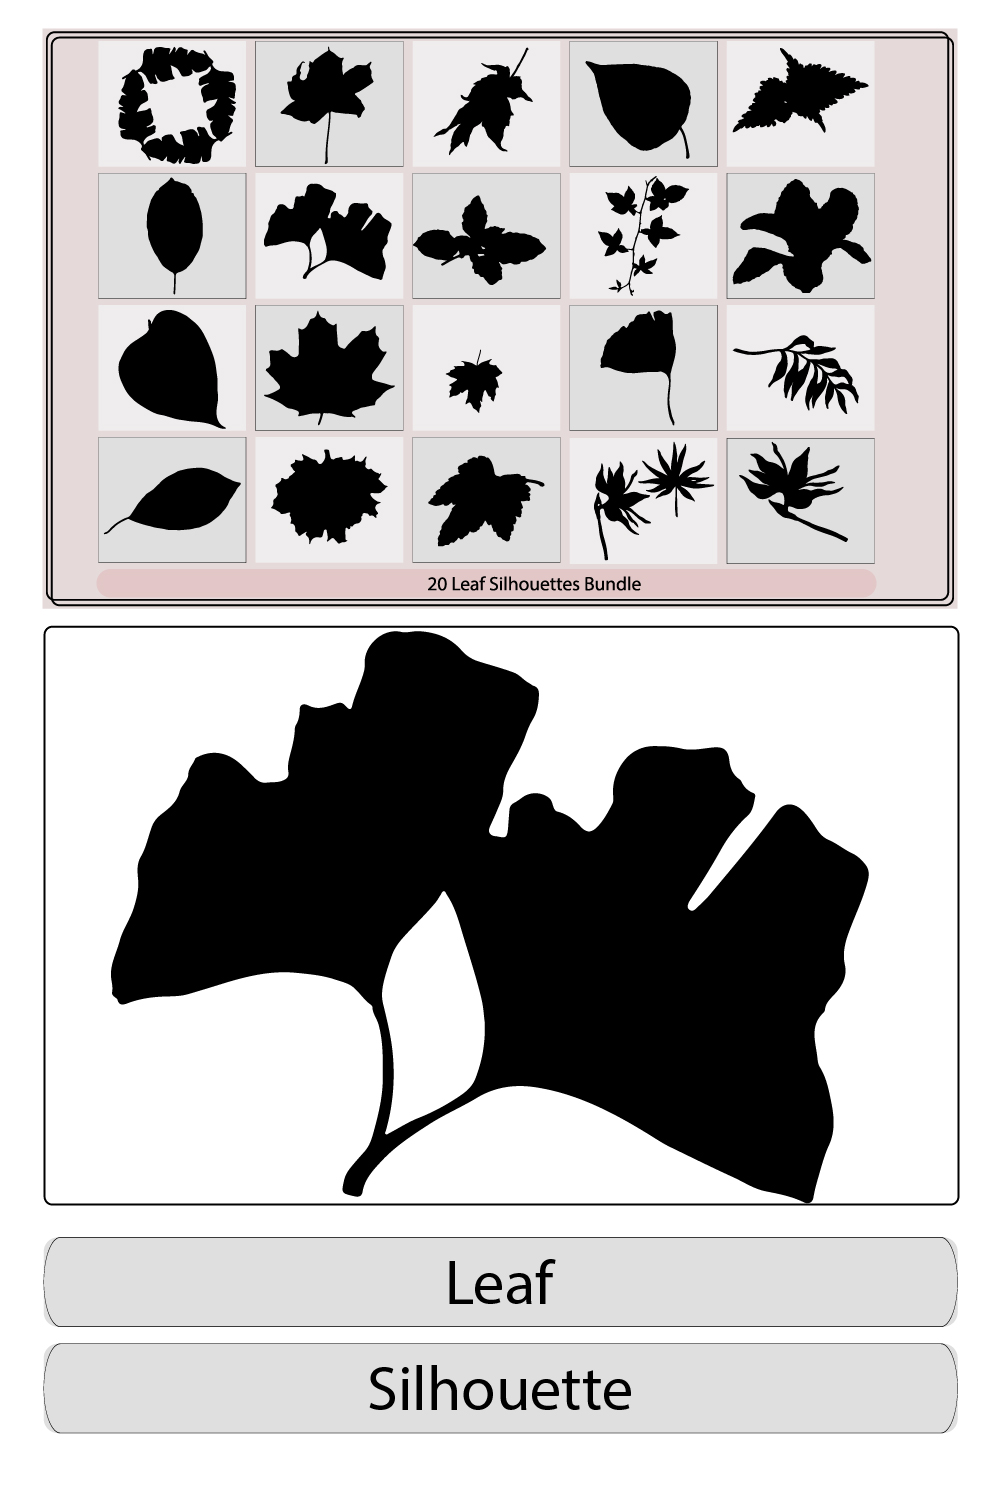 leaf silhouette,Black autumn leaves or foliage silhouettes,palm leaves silhouettes,silhouette branches with leaf pinterest preview image.